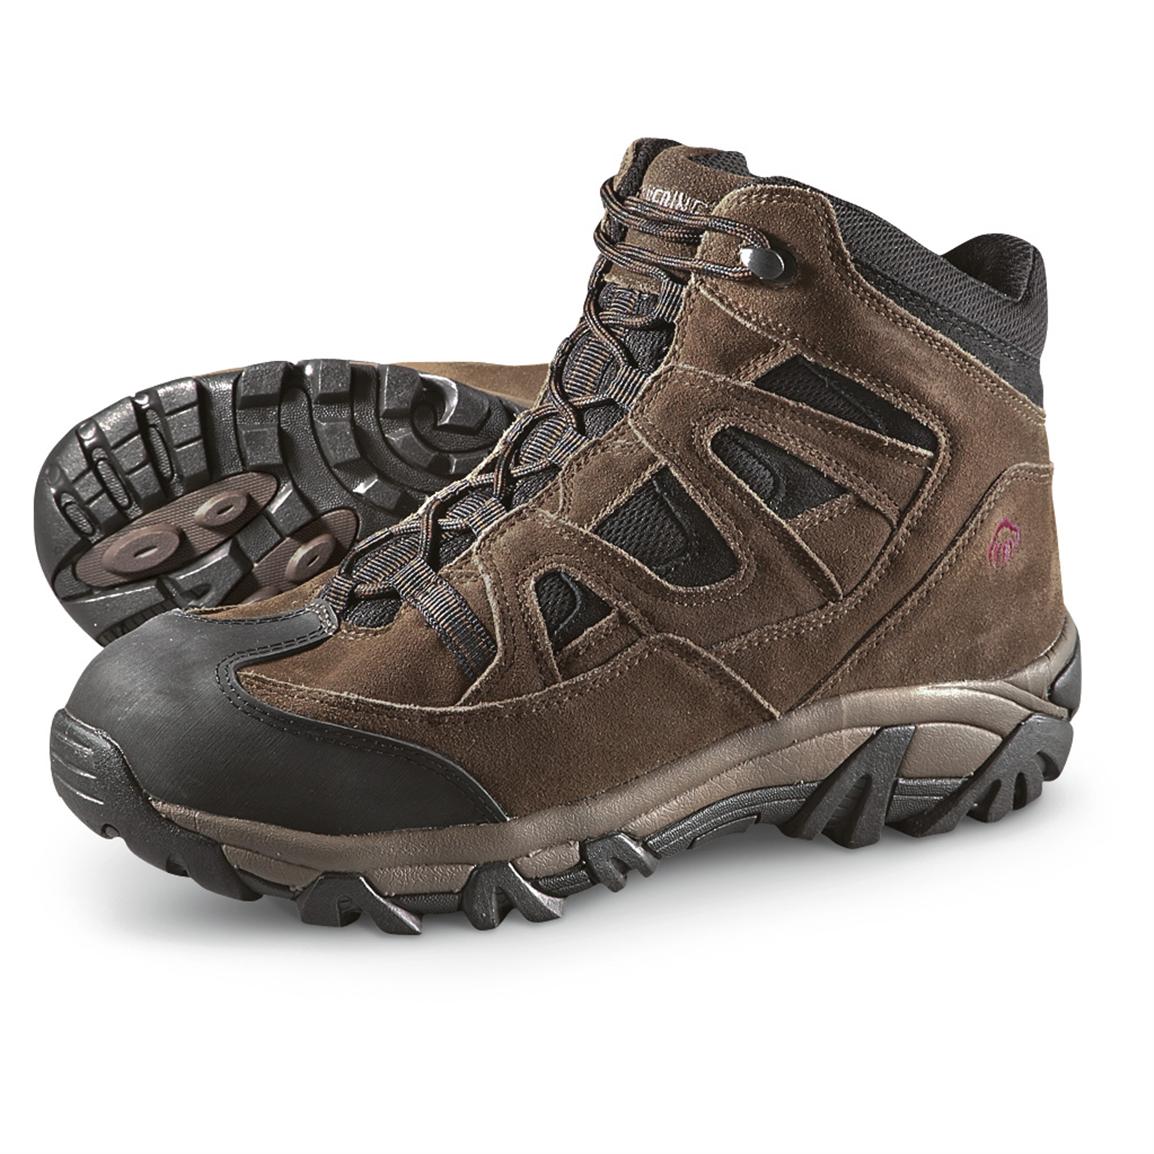 Men's Wolverine® Steel Toe Work Boots, Brown - 211460, Hiking Boots ...